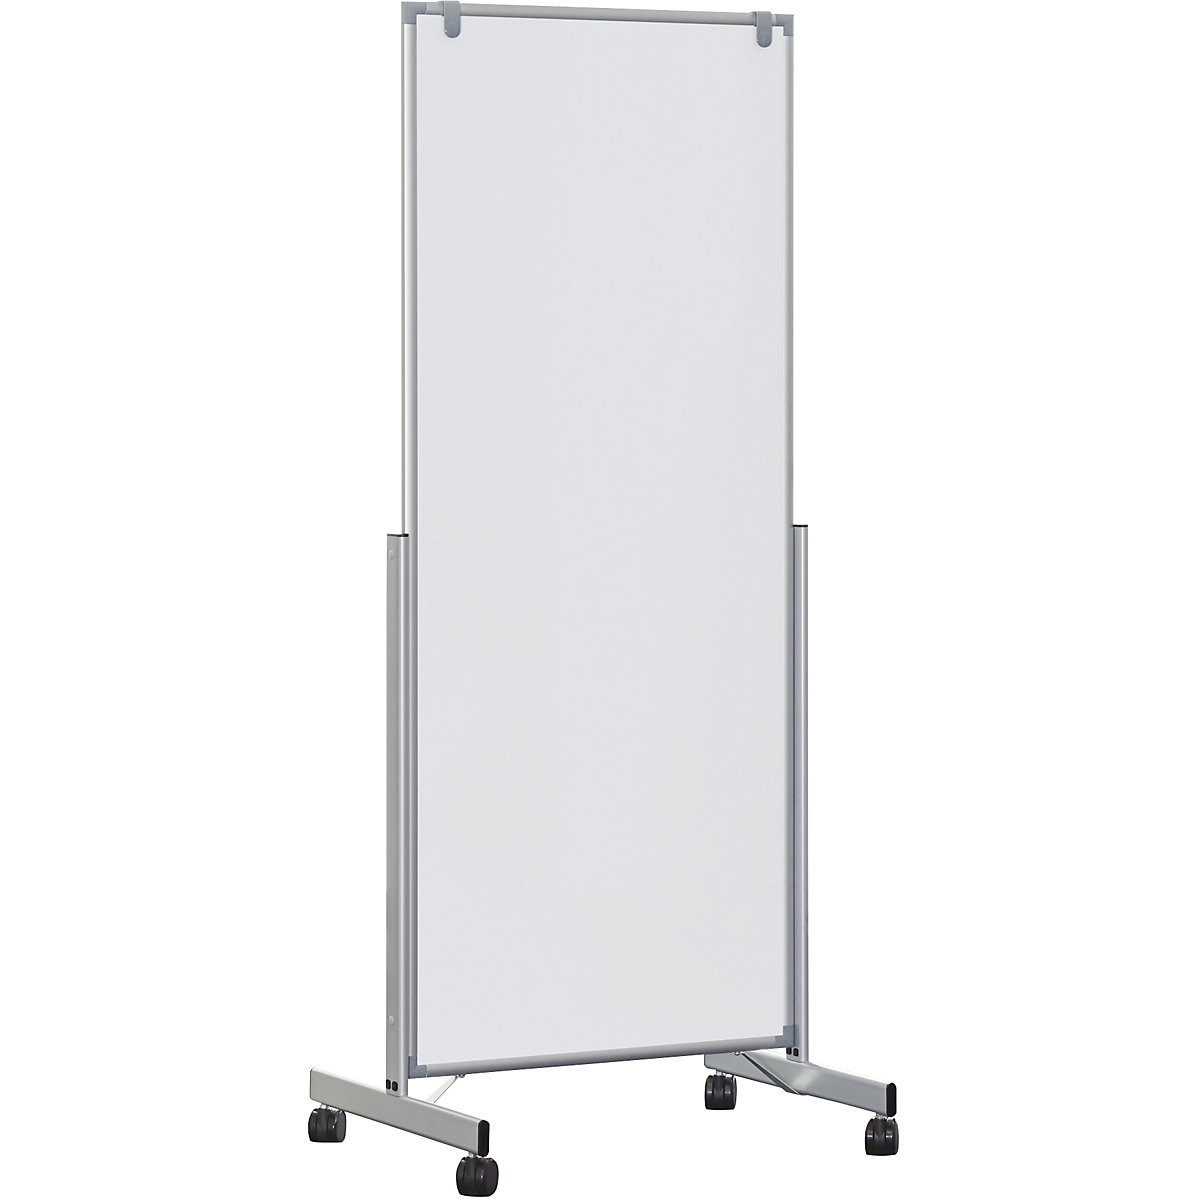 Whiteboard MAULpro easy2move, mobil MAUL, HxT 1965 x 640 mm, alusilber, Tafel-HxB 1800 x 750 mm